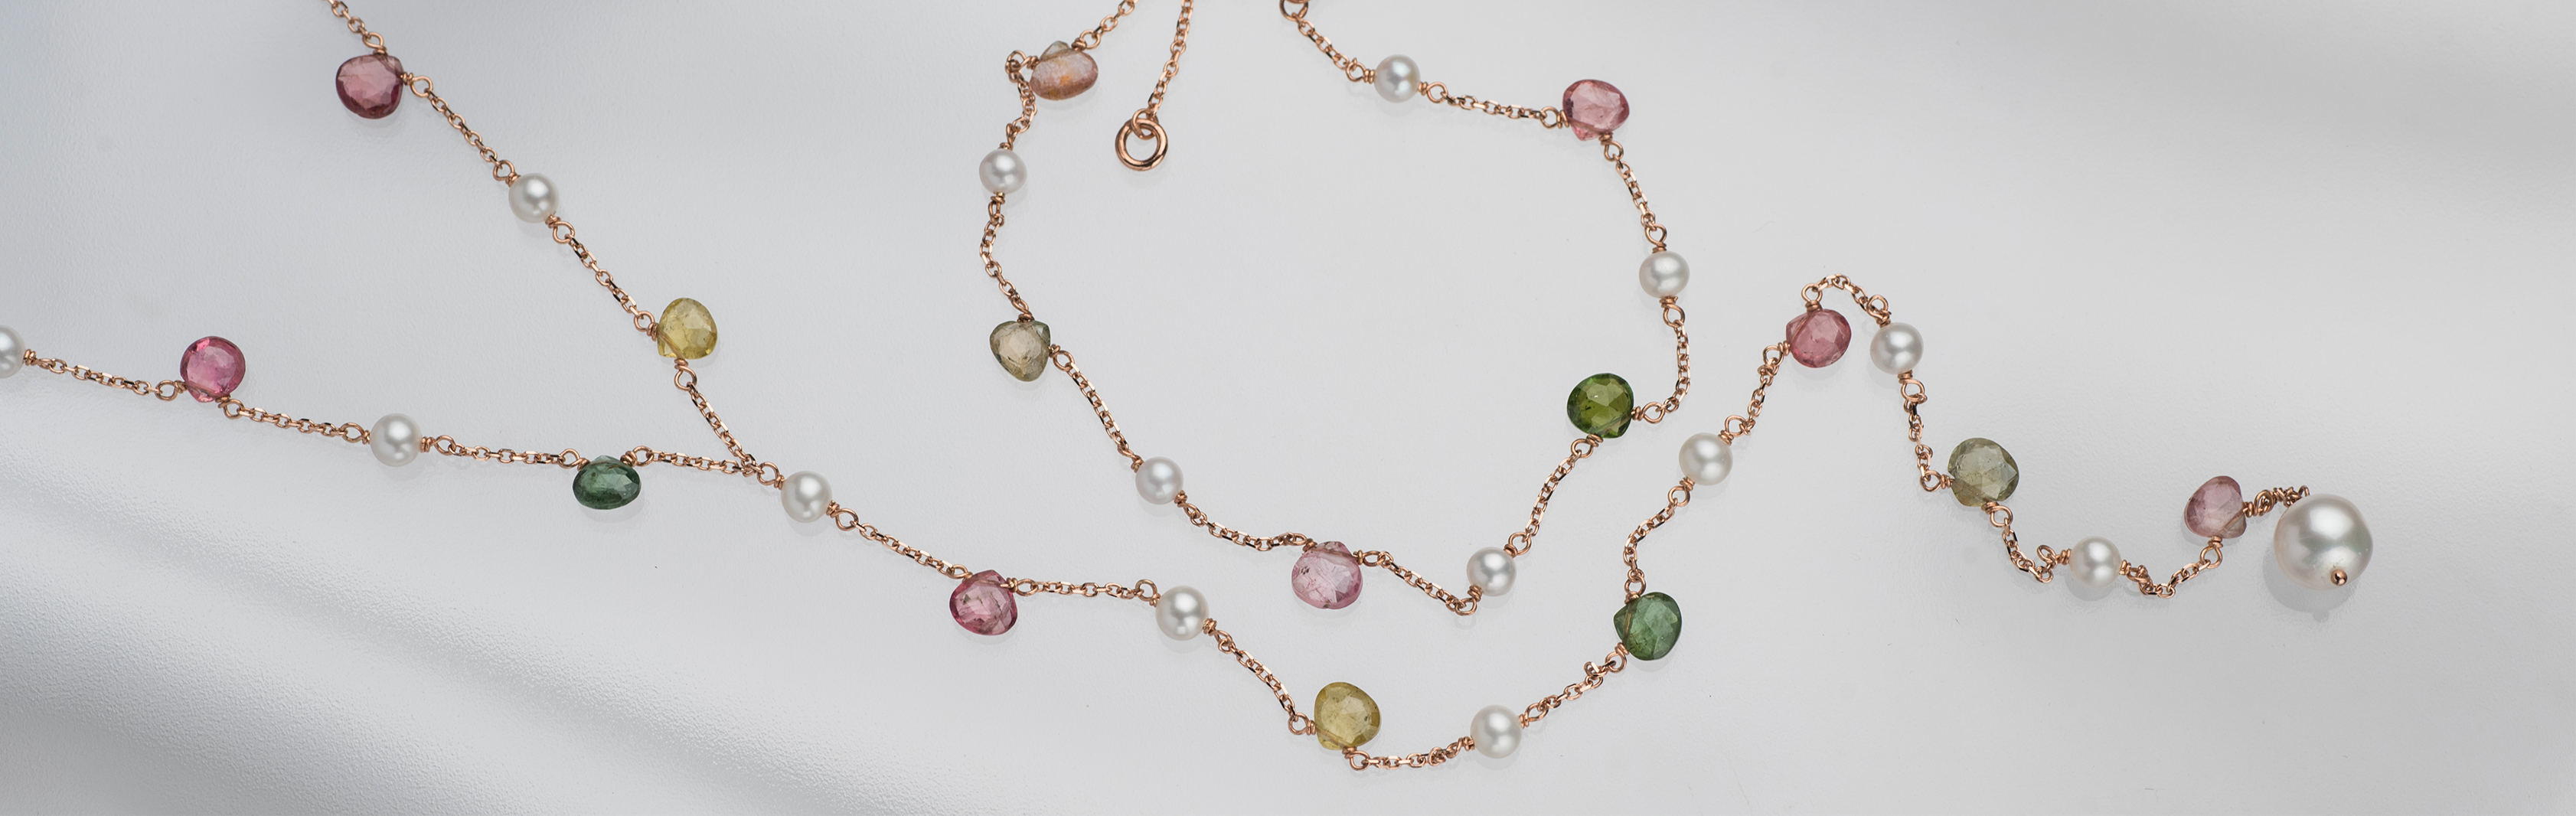 Magical Moments Collection | 14K Rose Gold Jewelry with Natural Gemstones